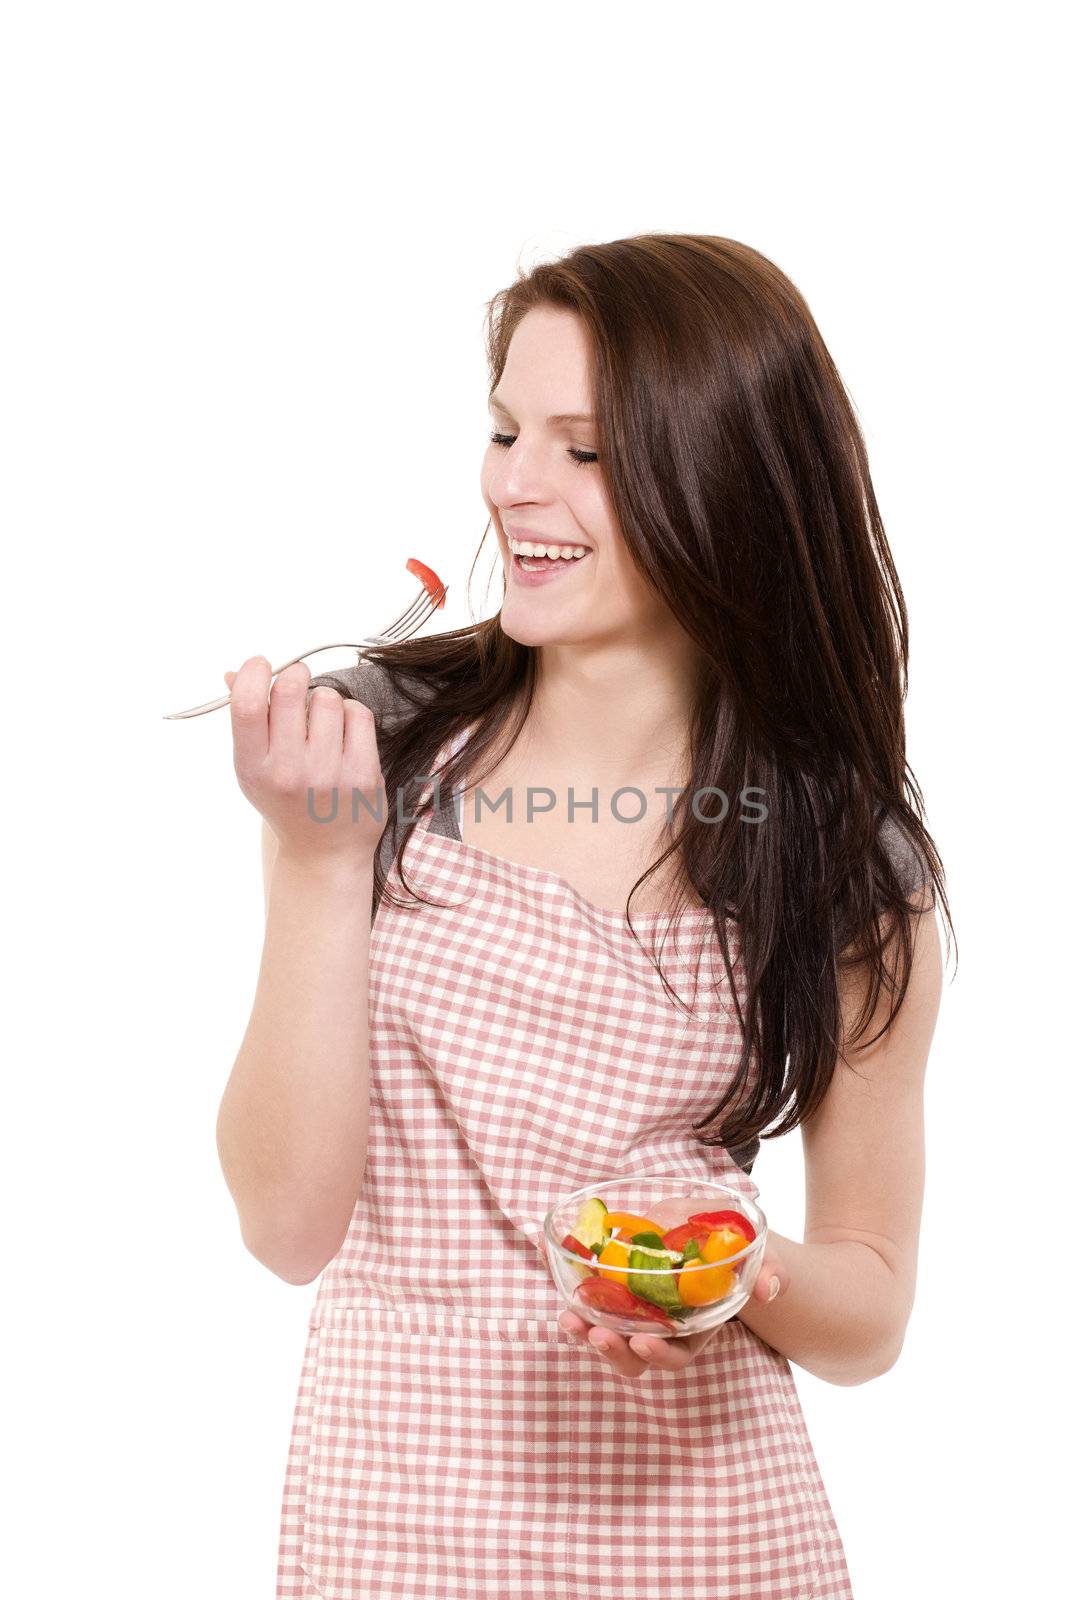 laughing woman eating salad by RobStark